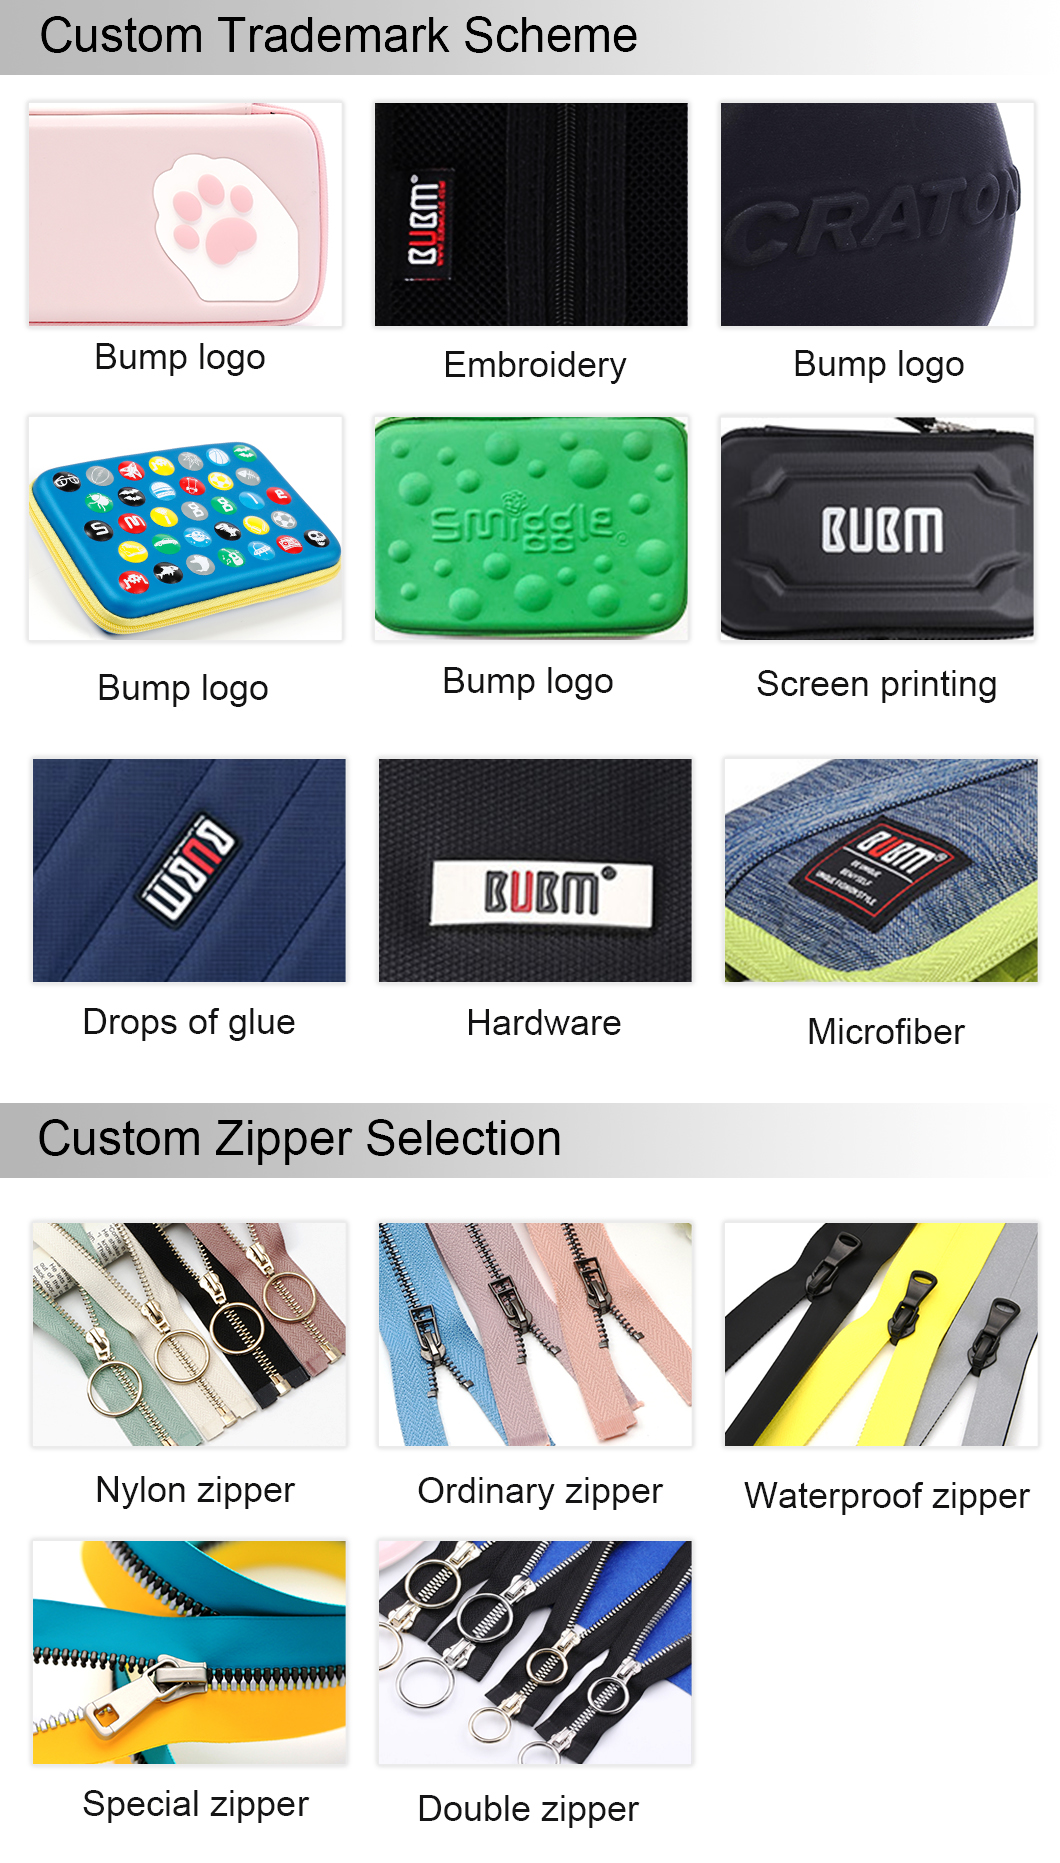 EVA Hard Protective Storage Bag Travel Case for IPod, MP3/MP4 Player, Cables(图5)